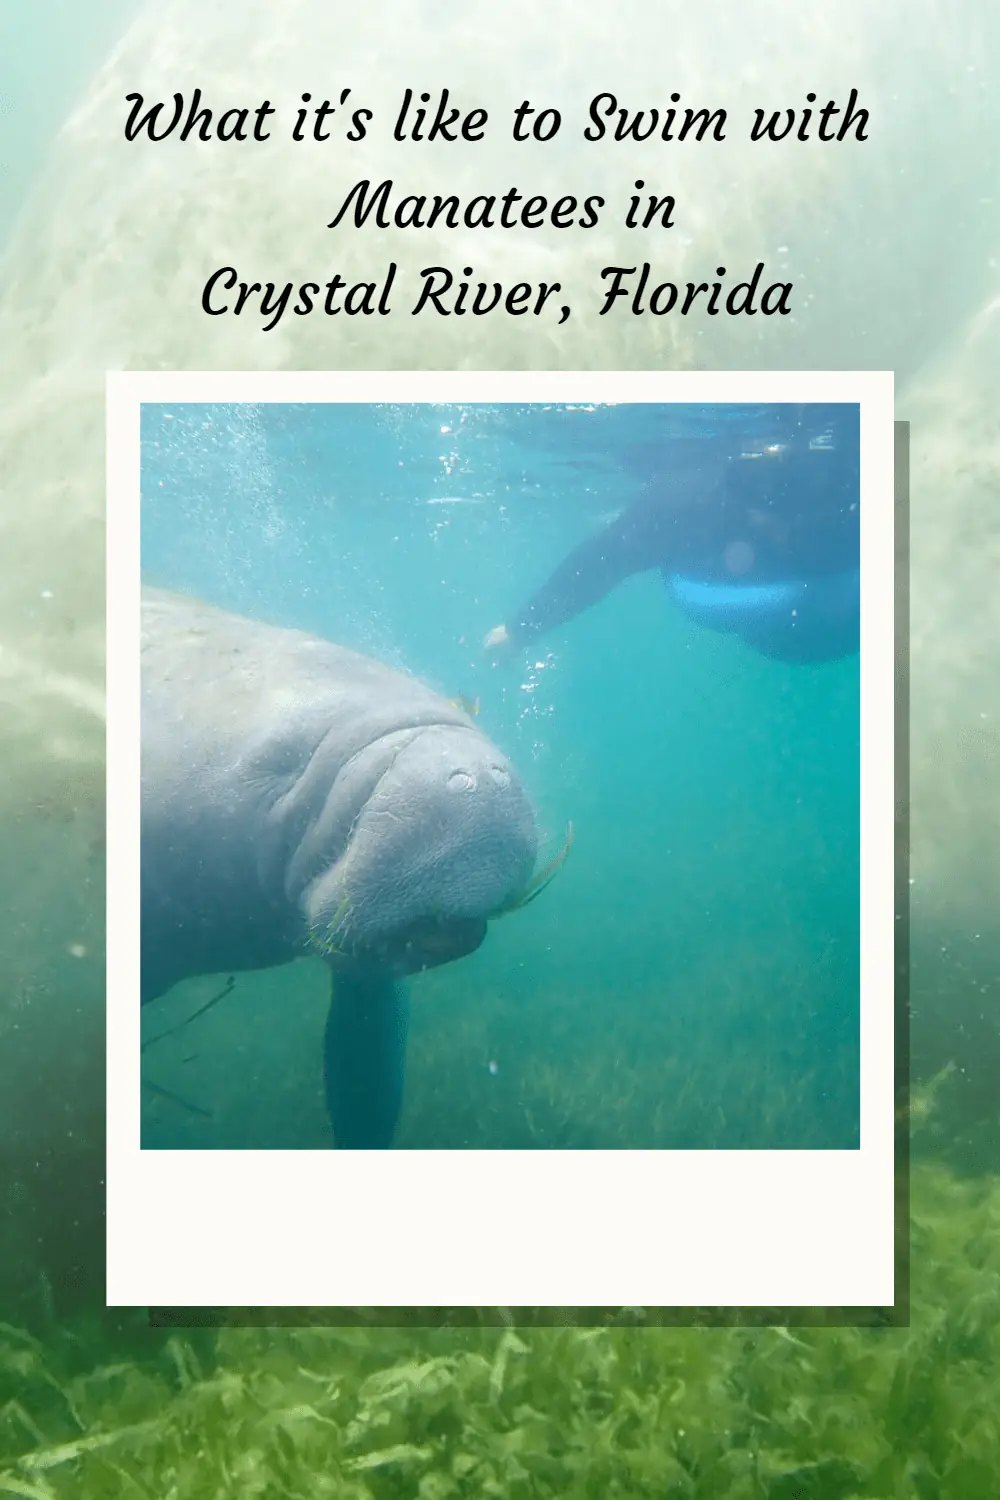 Read on for my family's experience getting into the water with wild manatees in Crystal River, Florida. #Florida #visitFlorida #wildlife